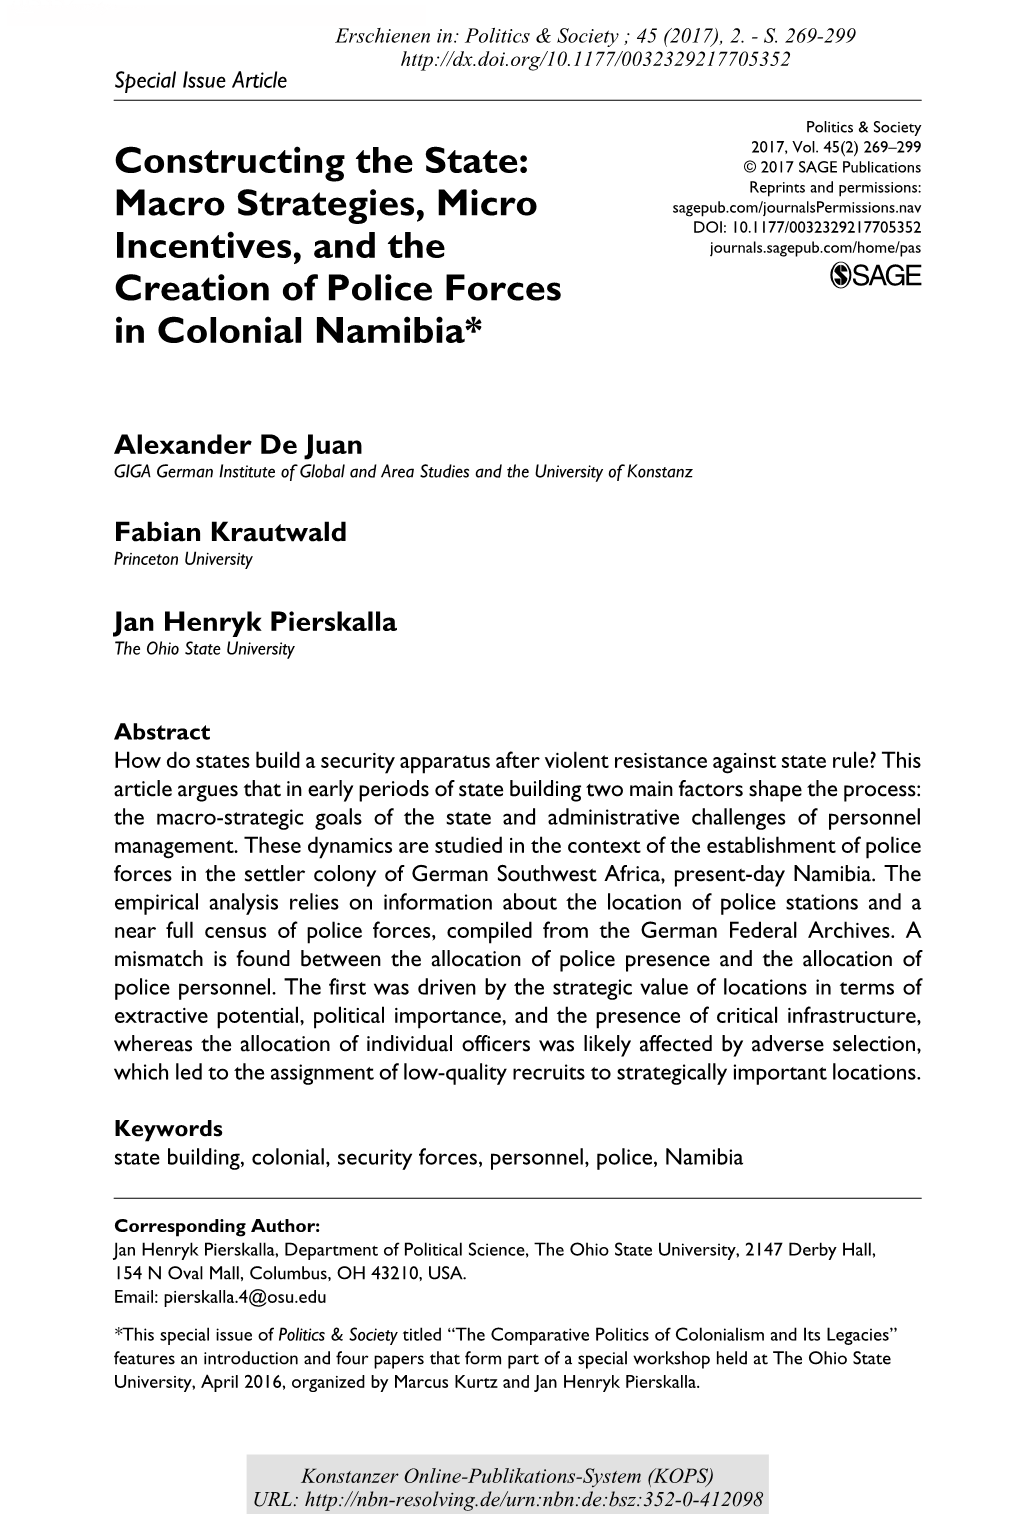 Macro Strategies, Micro Incentives, and the Creation of Police Forces in Colonial Namibia